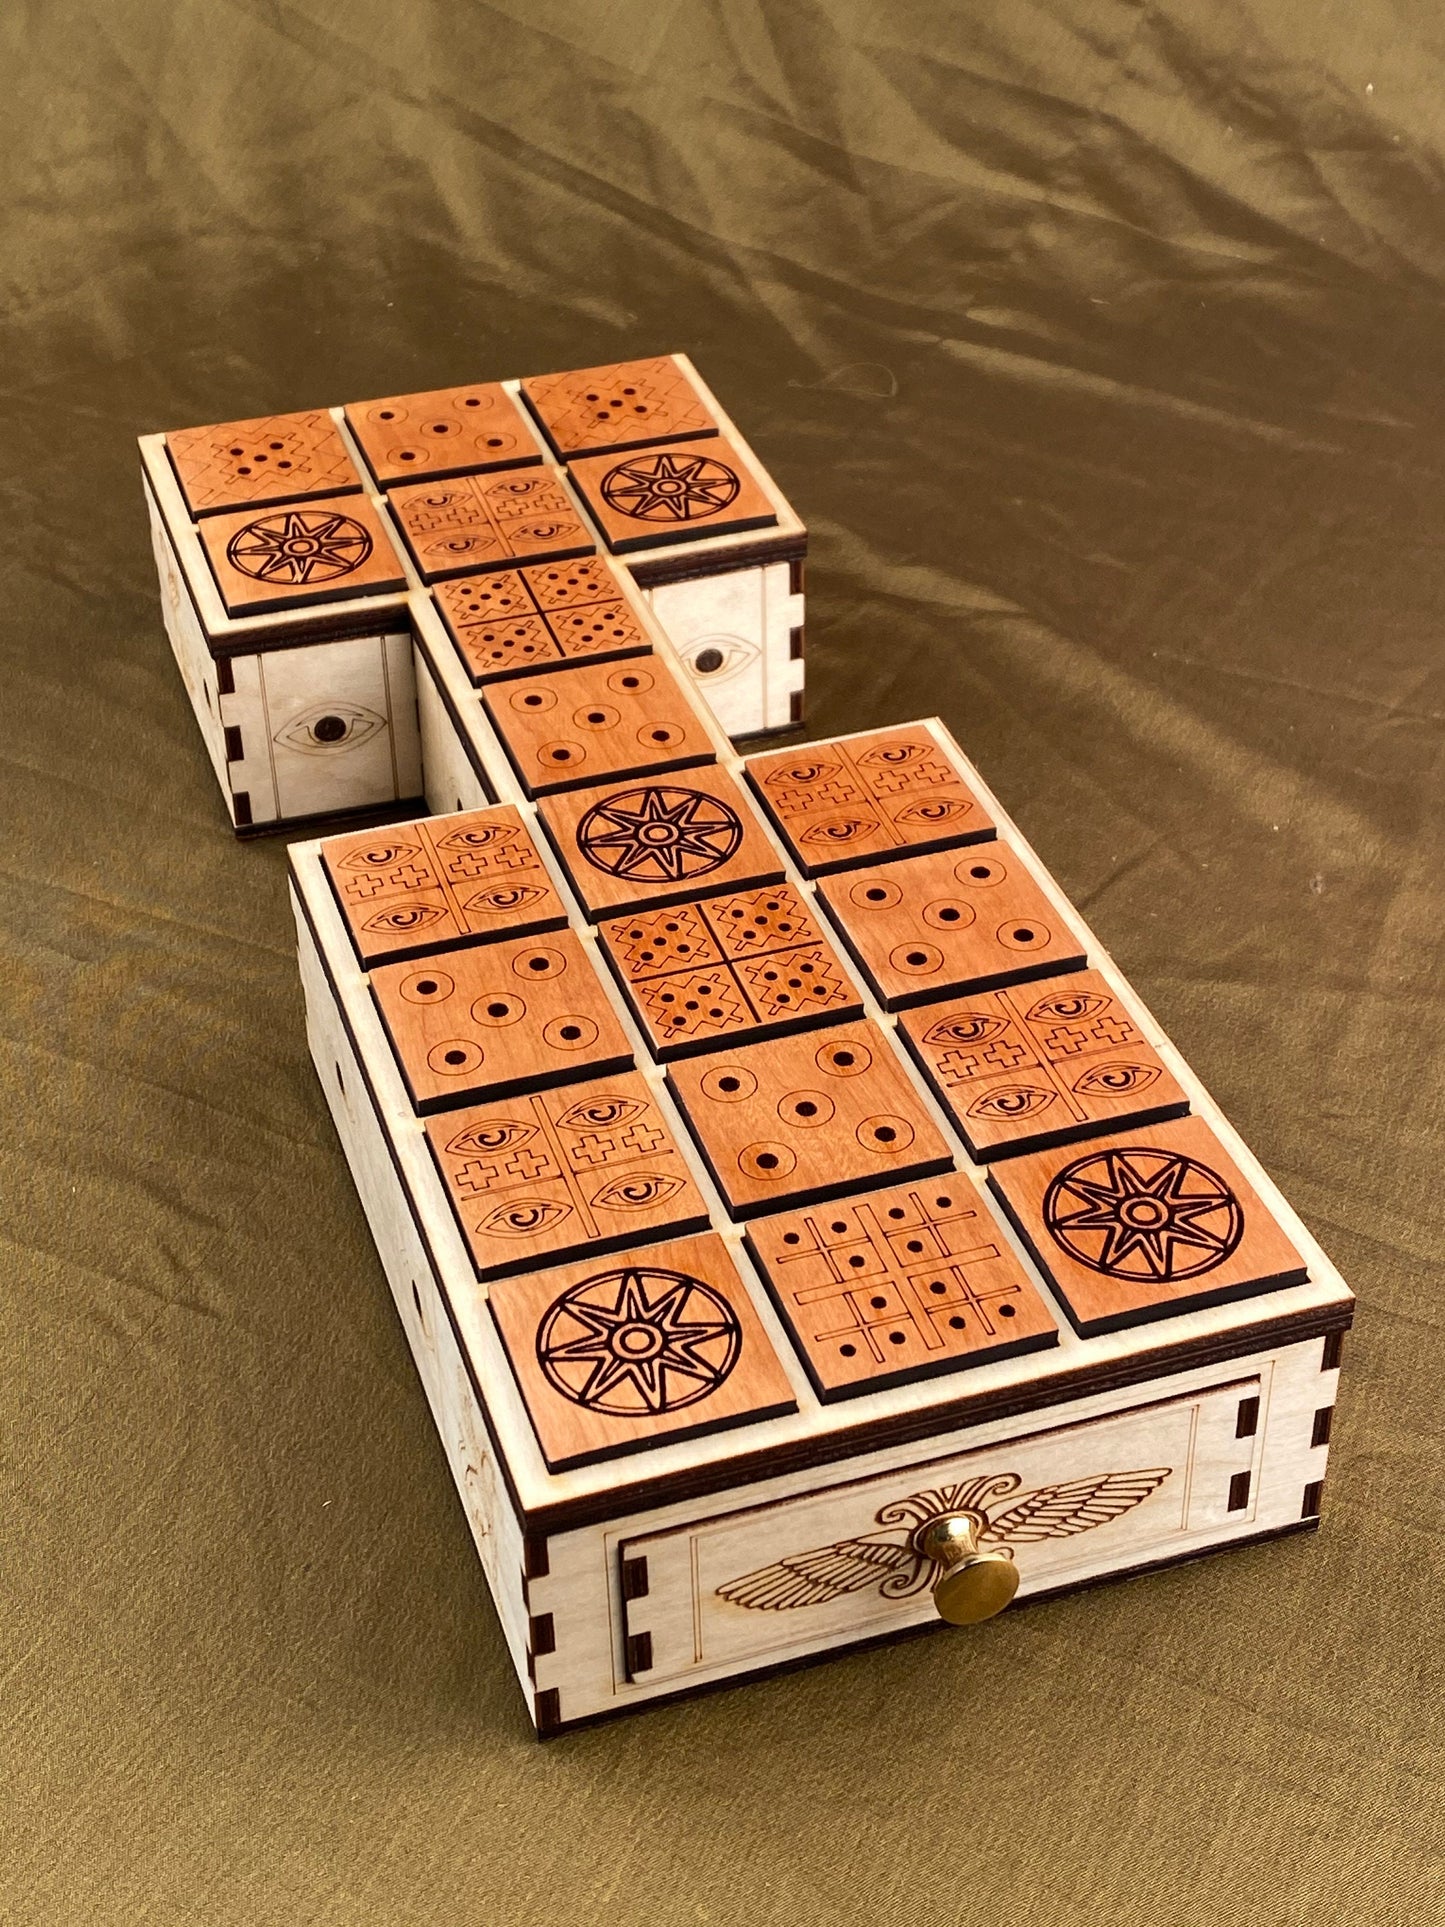 The Royal Game of Ur ~ The Ancient Sumerian Game. Beautiful Wood with Amazing Details.